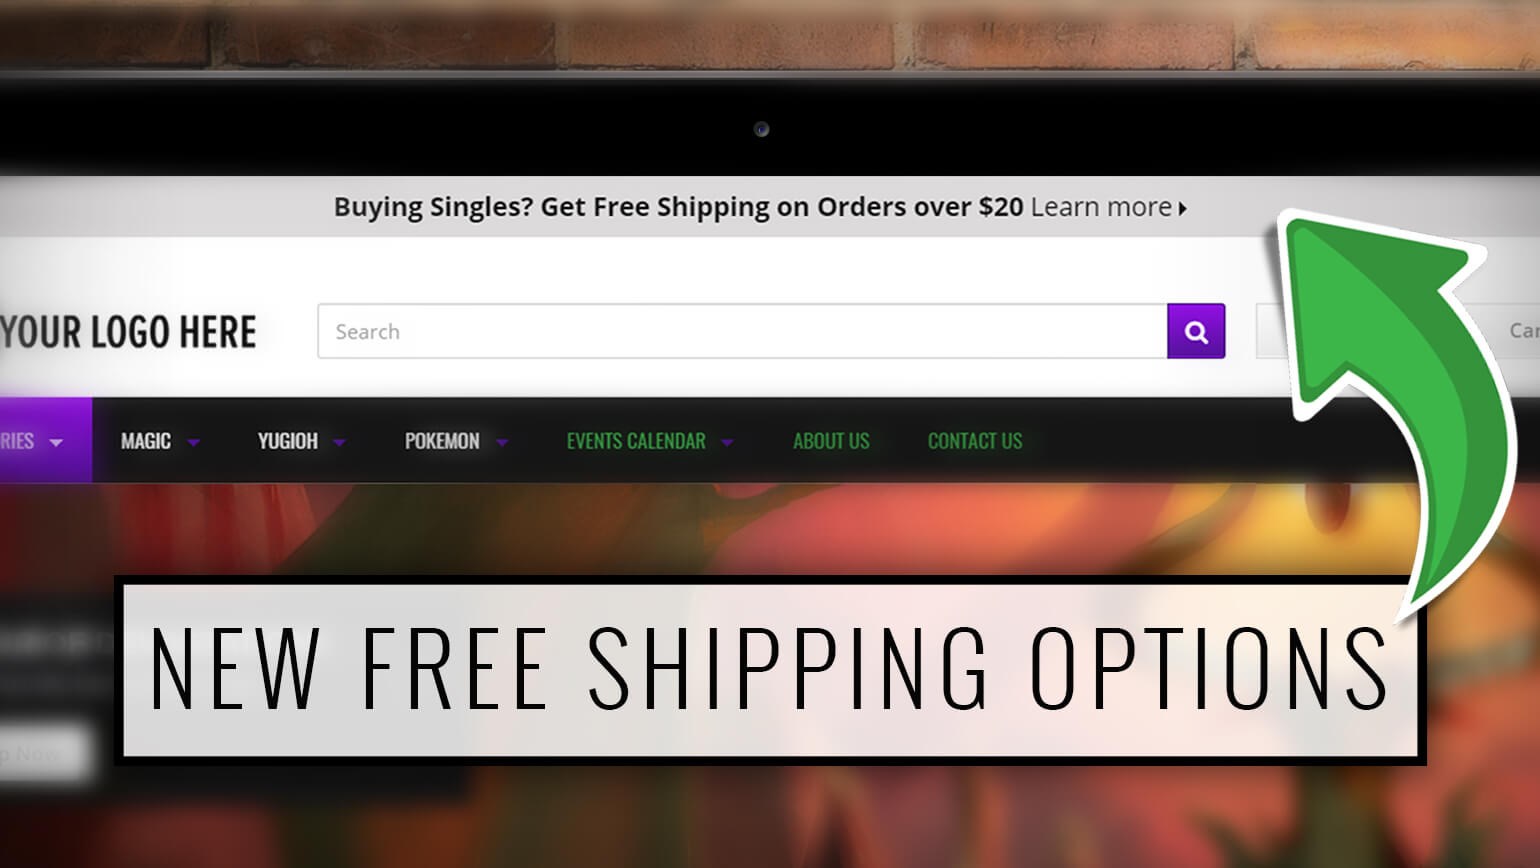 Free Shipping Based on Order Total Now Available for Pro